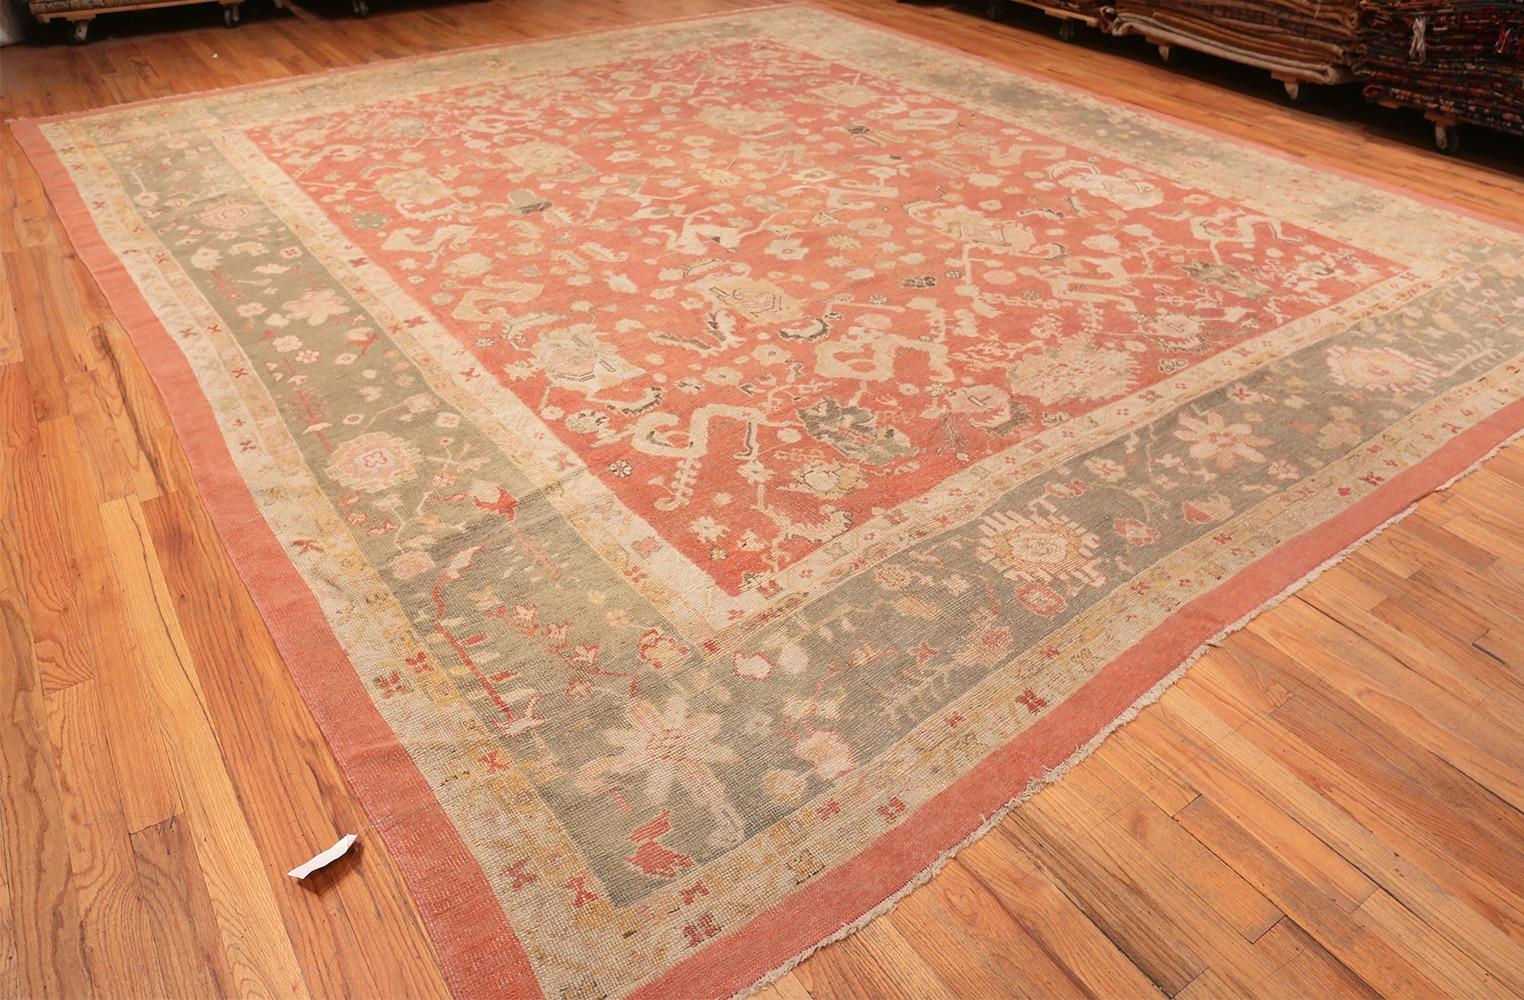 Beautiful Large Tribal Antique Turkish Oushak Rug, Country of Origin / Rug Type: Antique Turkish Rug, Circa Date: 1900 – Rugs from the town of Oushak in Western Anatolia have exquisite beauty and unique designs that have made them favorites since